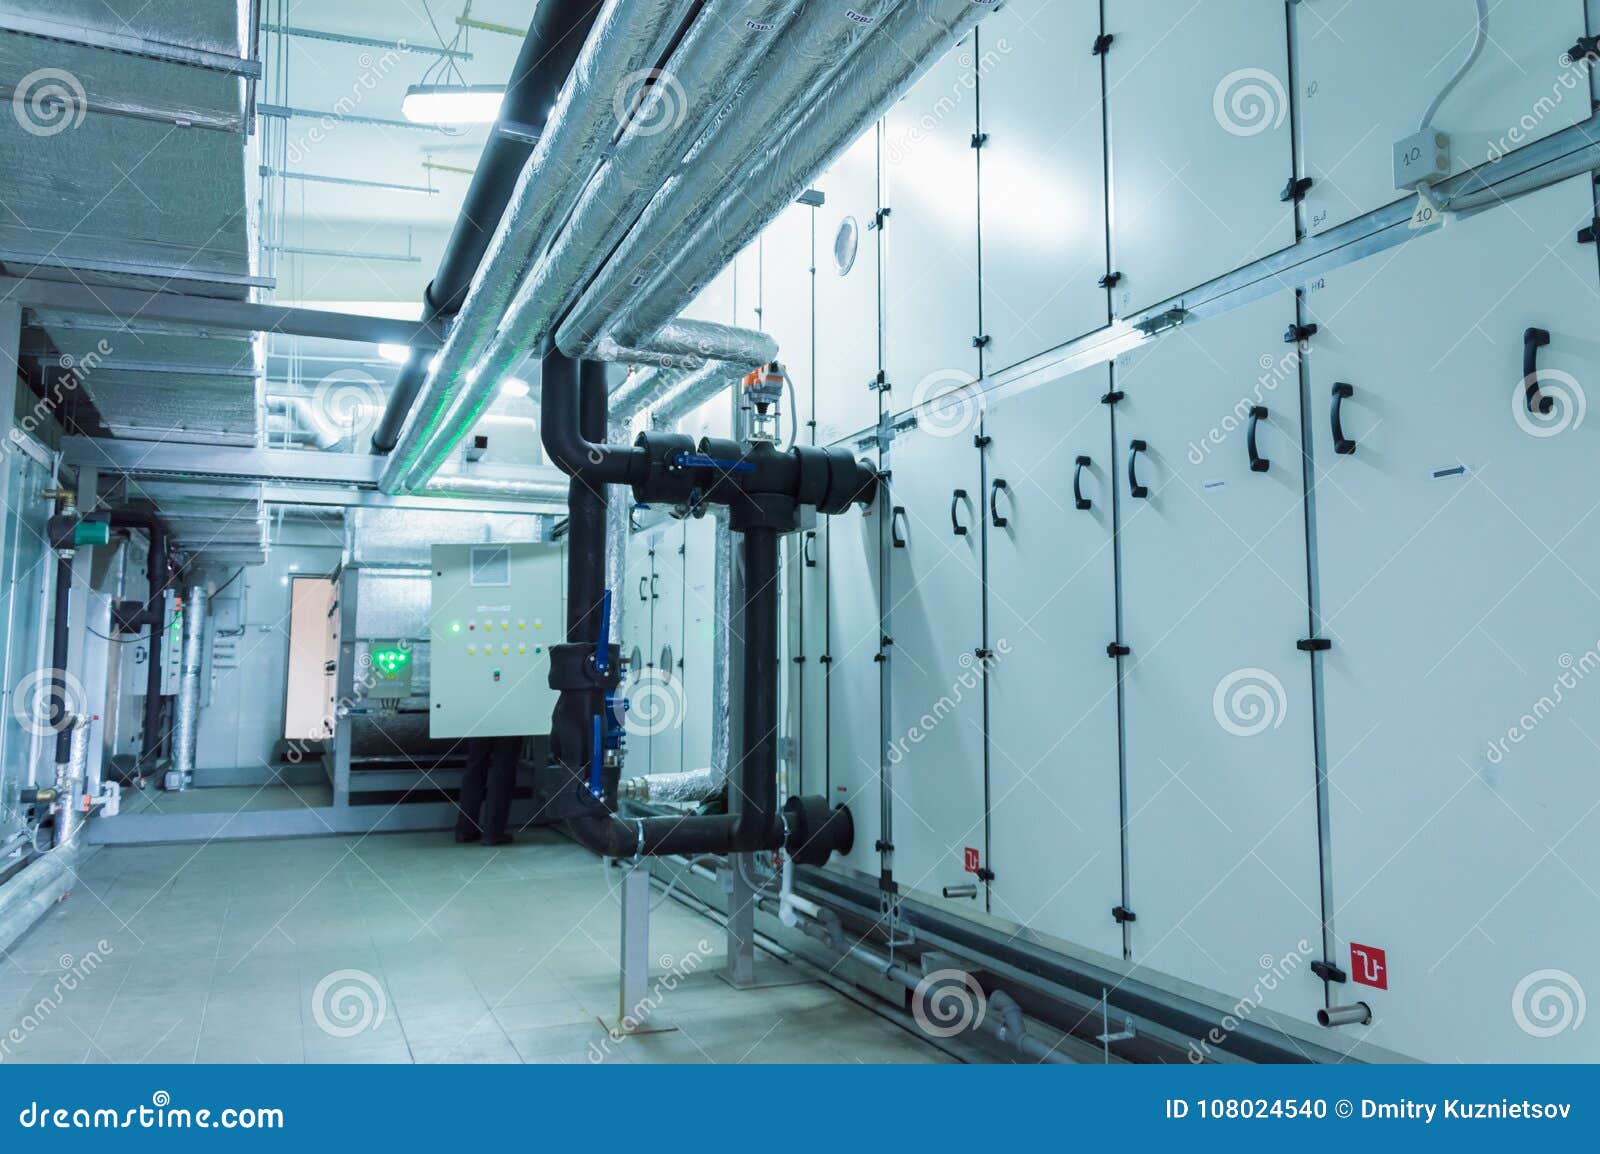 side view of the huge gray industrial air handling unit in the ventilation plant room